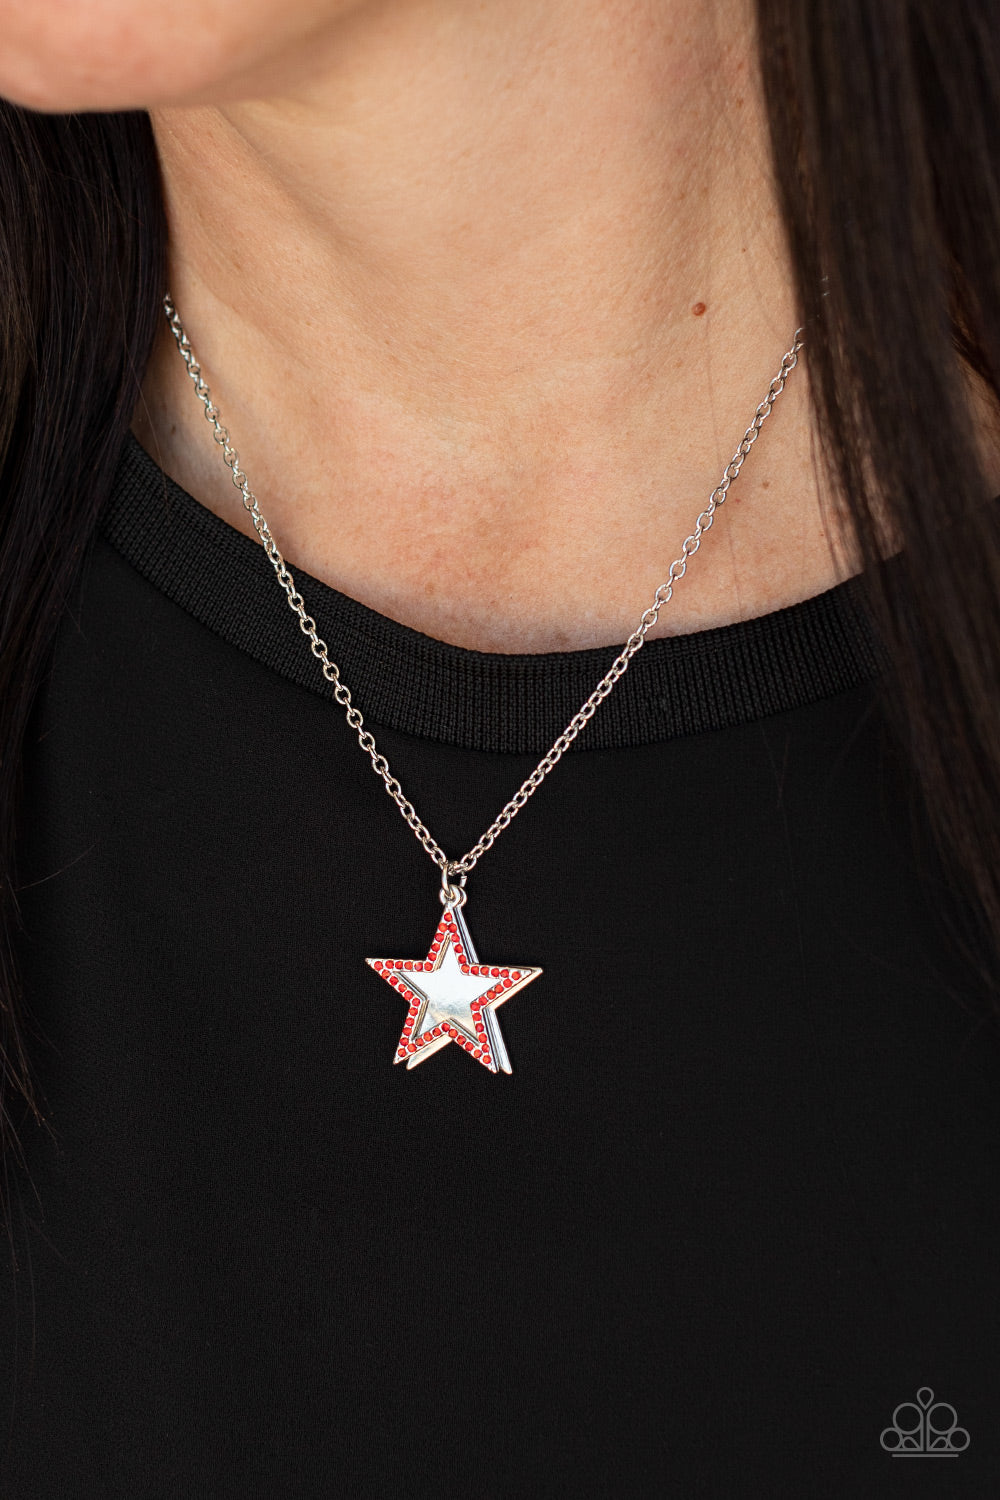 American Anthem Red Necklace - Paparazzi Accessories  A red rhinestone encrusted silver star delicately overlaps with a shiny silver star below the collar, creating a sparkly patriotic pendant. Features an adjustable clasp closure.  Sold as one individual necklace. Includes one pair of matching earrings.